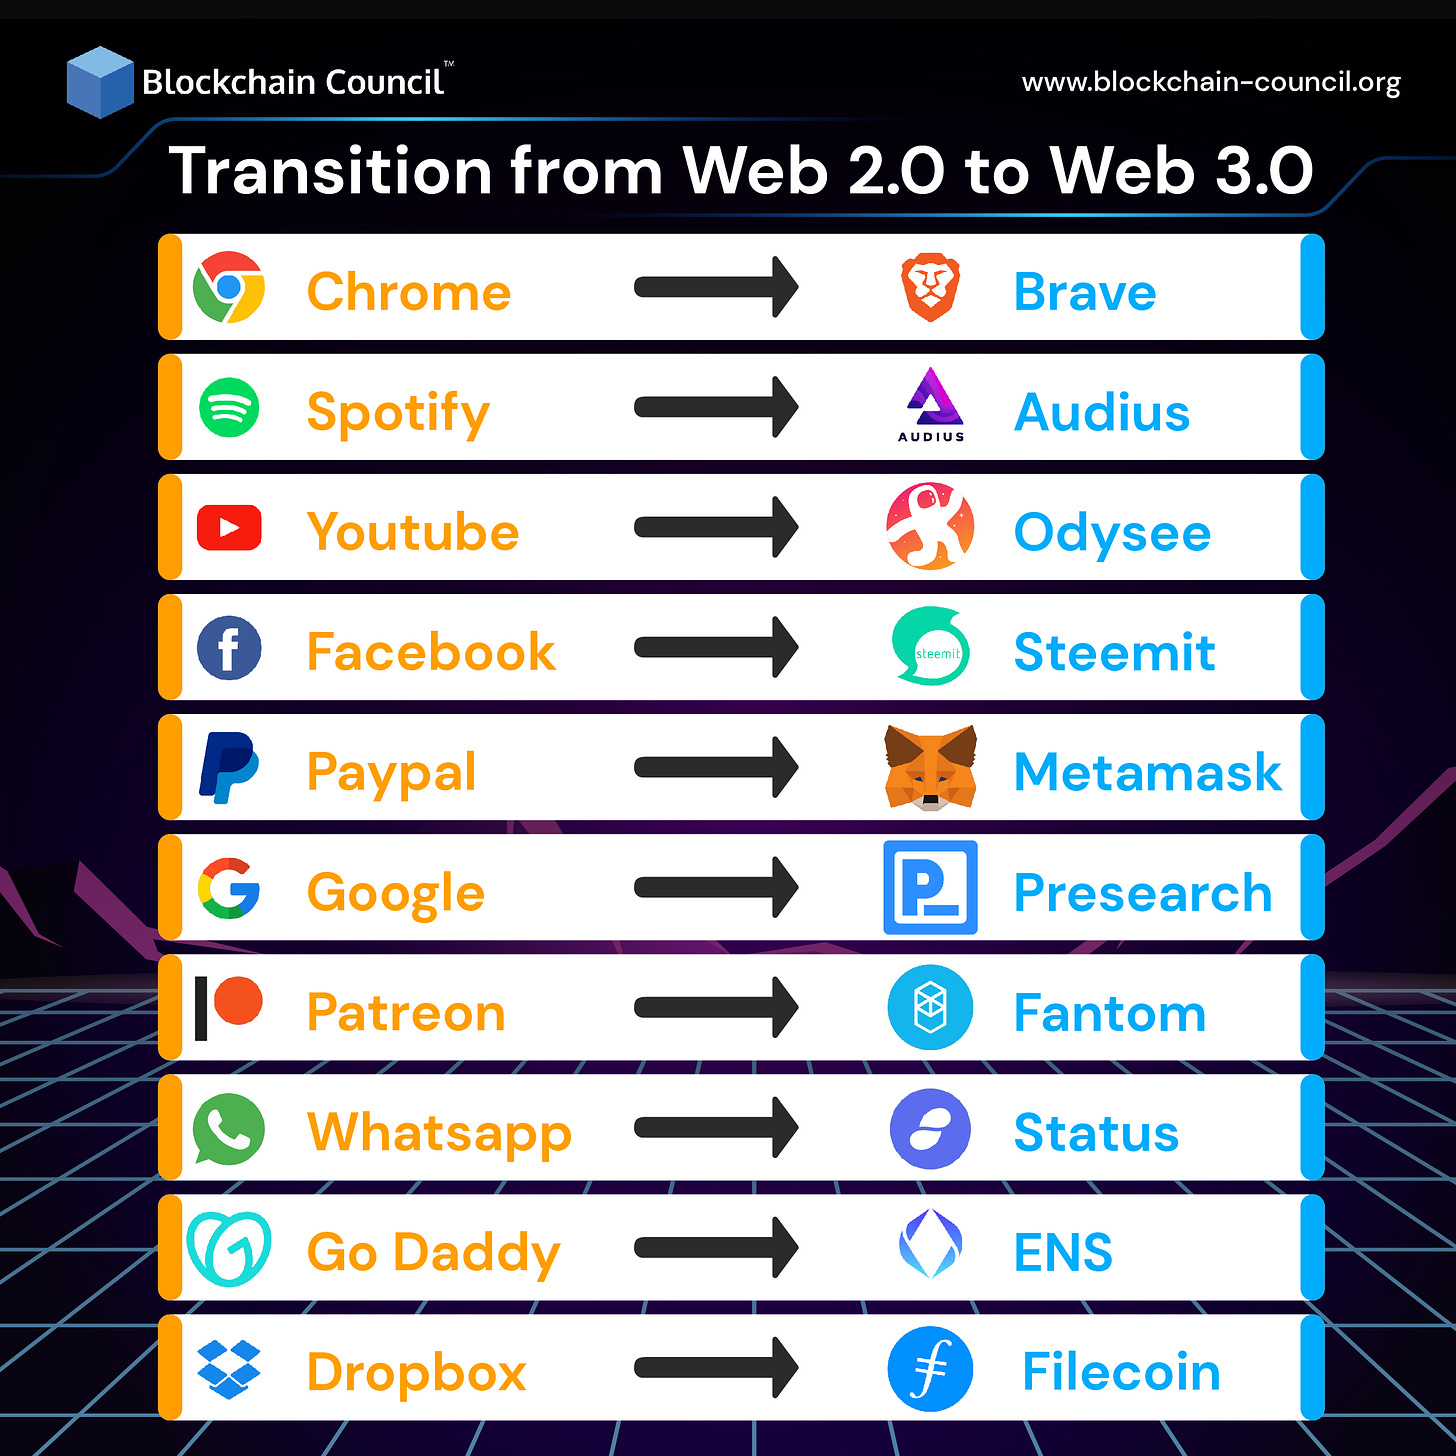 Transition from Web 2.0 to Web 3.0